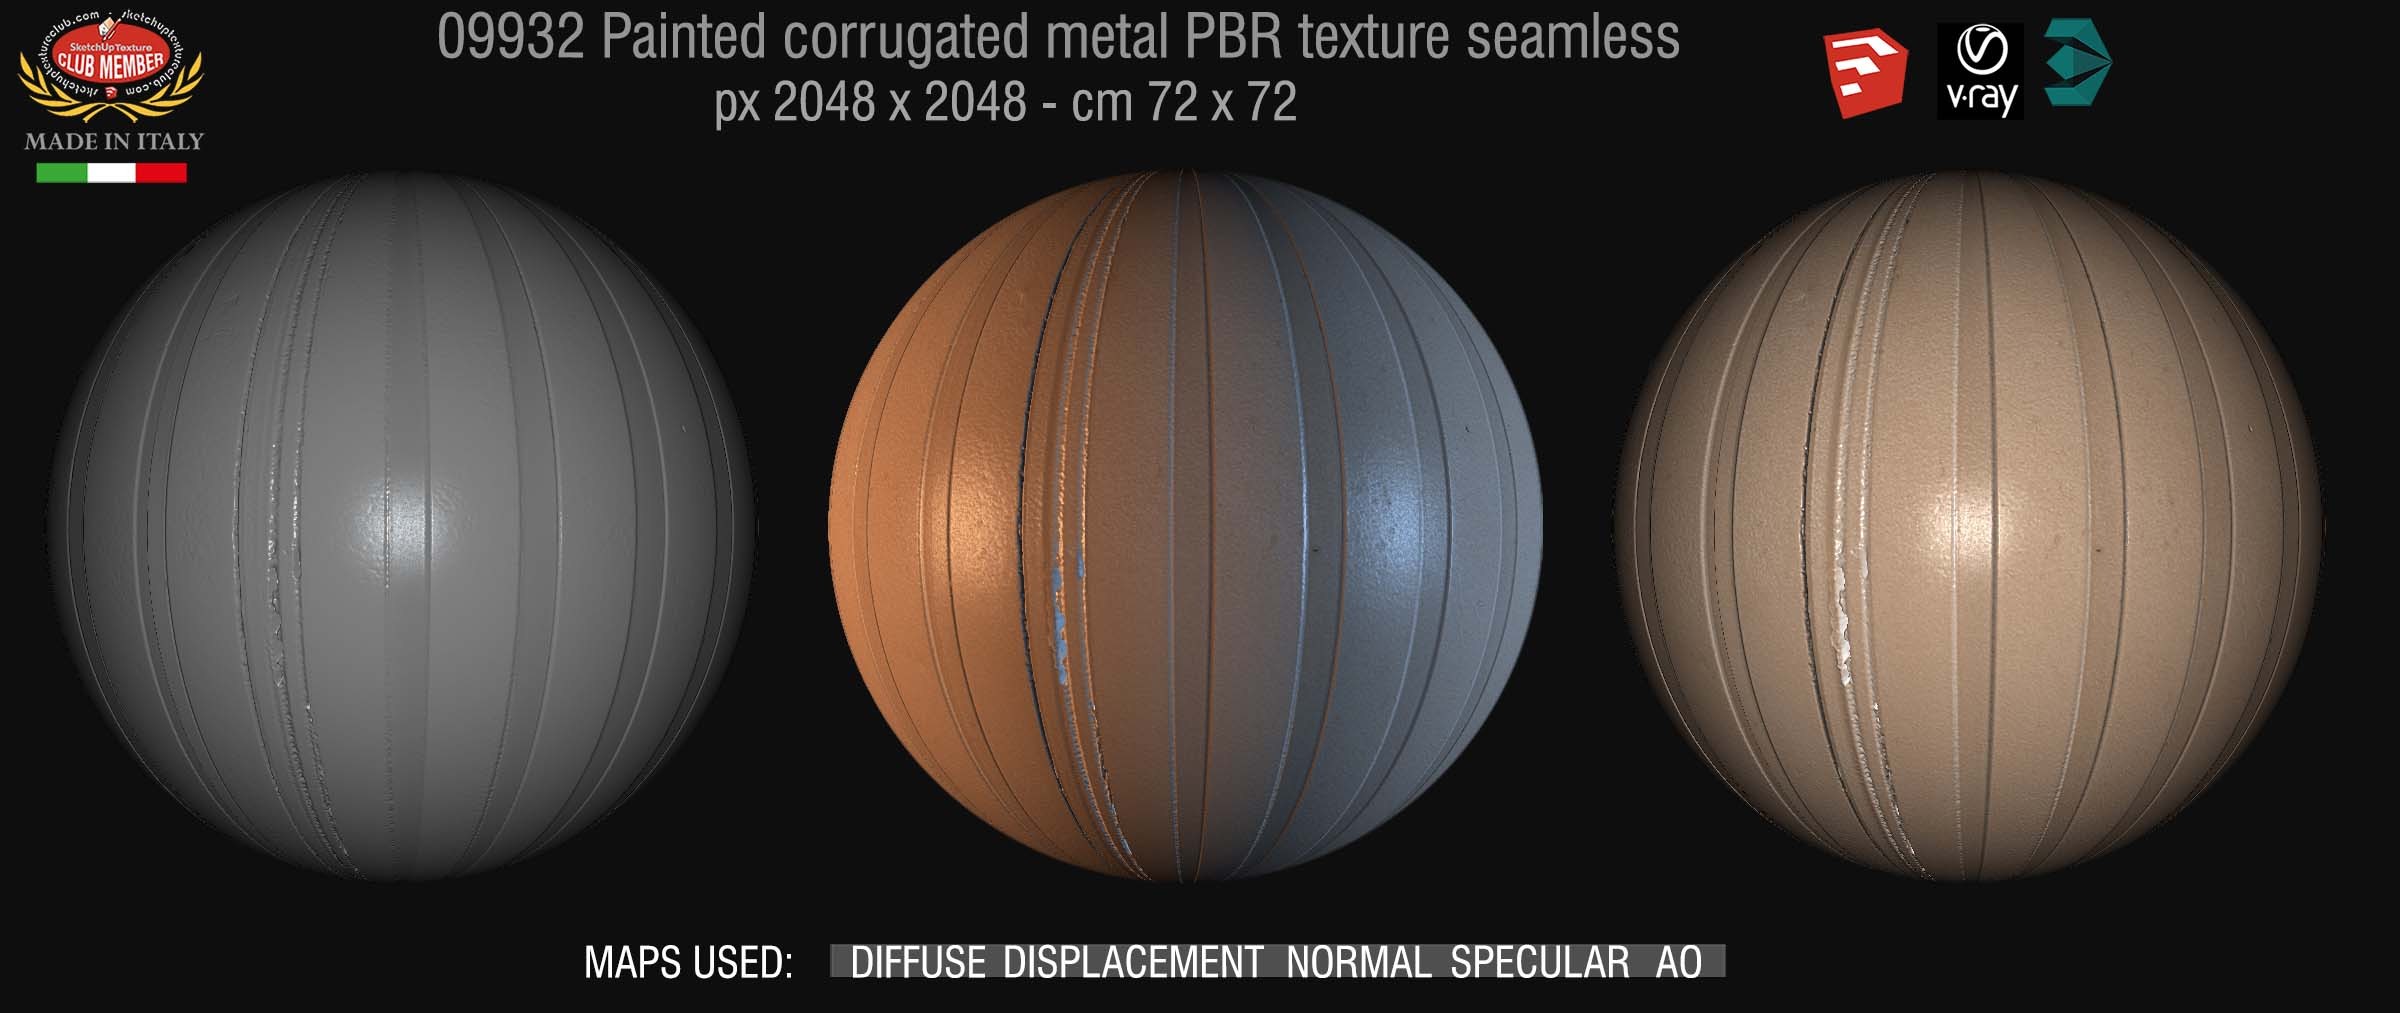 09932 Painted corrugated metal PBR texture seamless DEMO